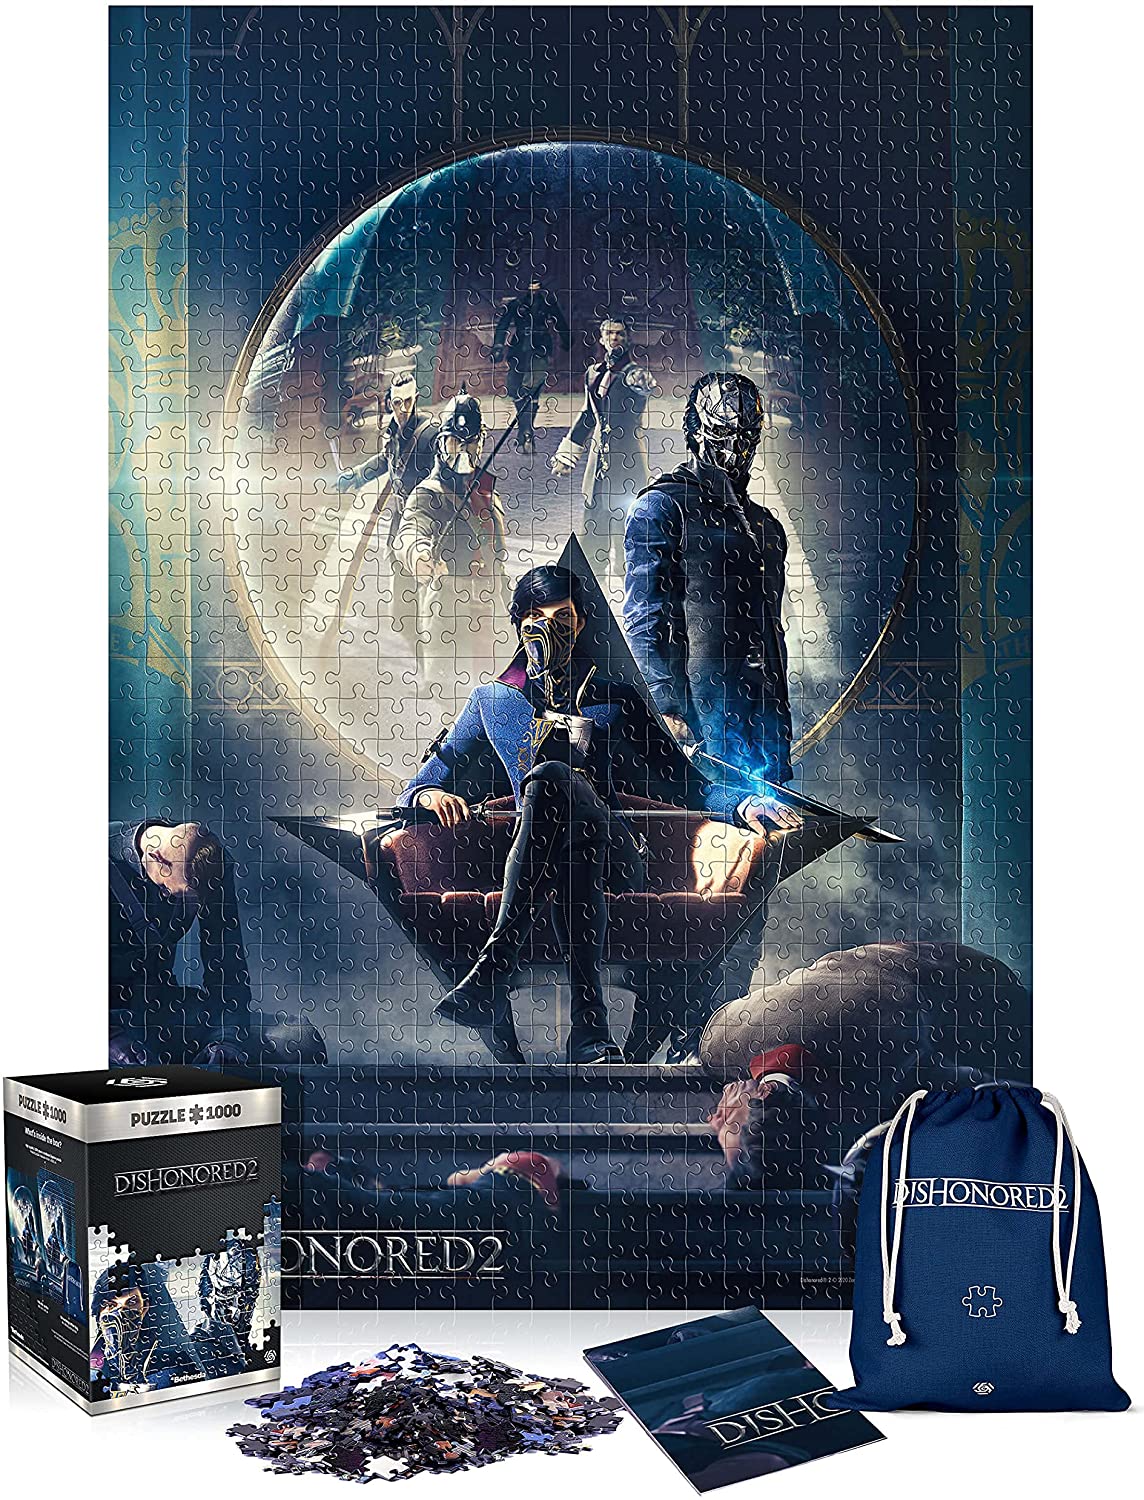 DISHONORED 2 THRONE PUZZLES 1000 pcs - Fan-shop